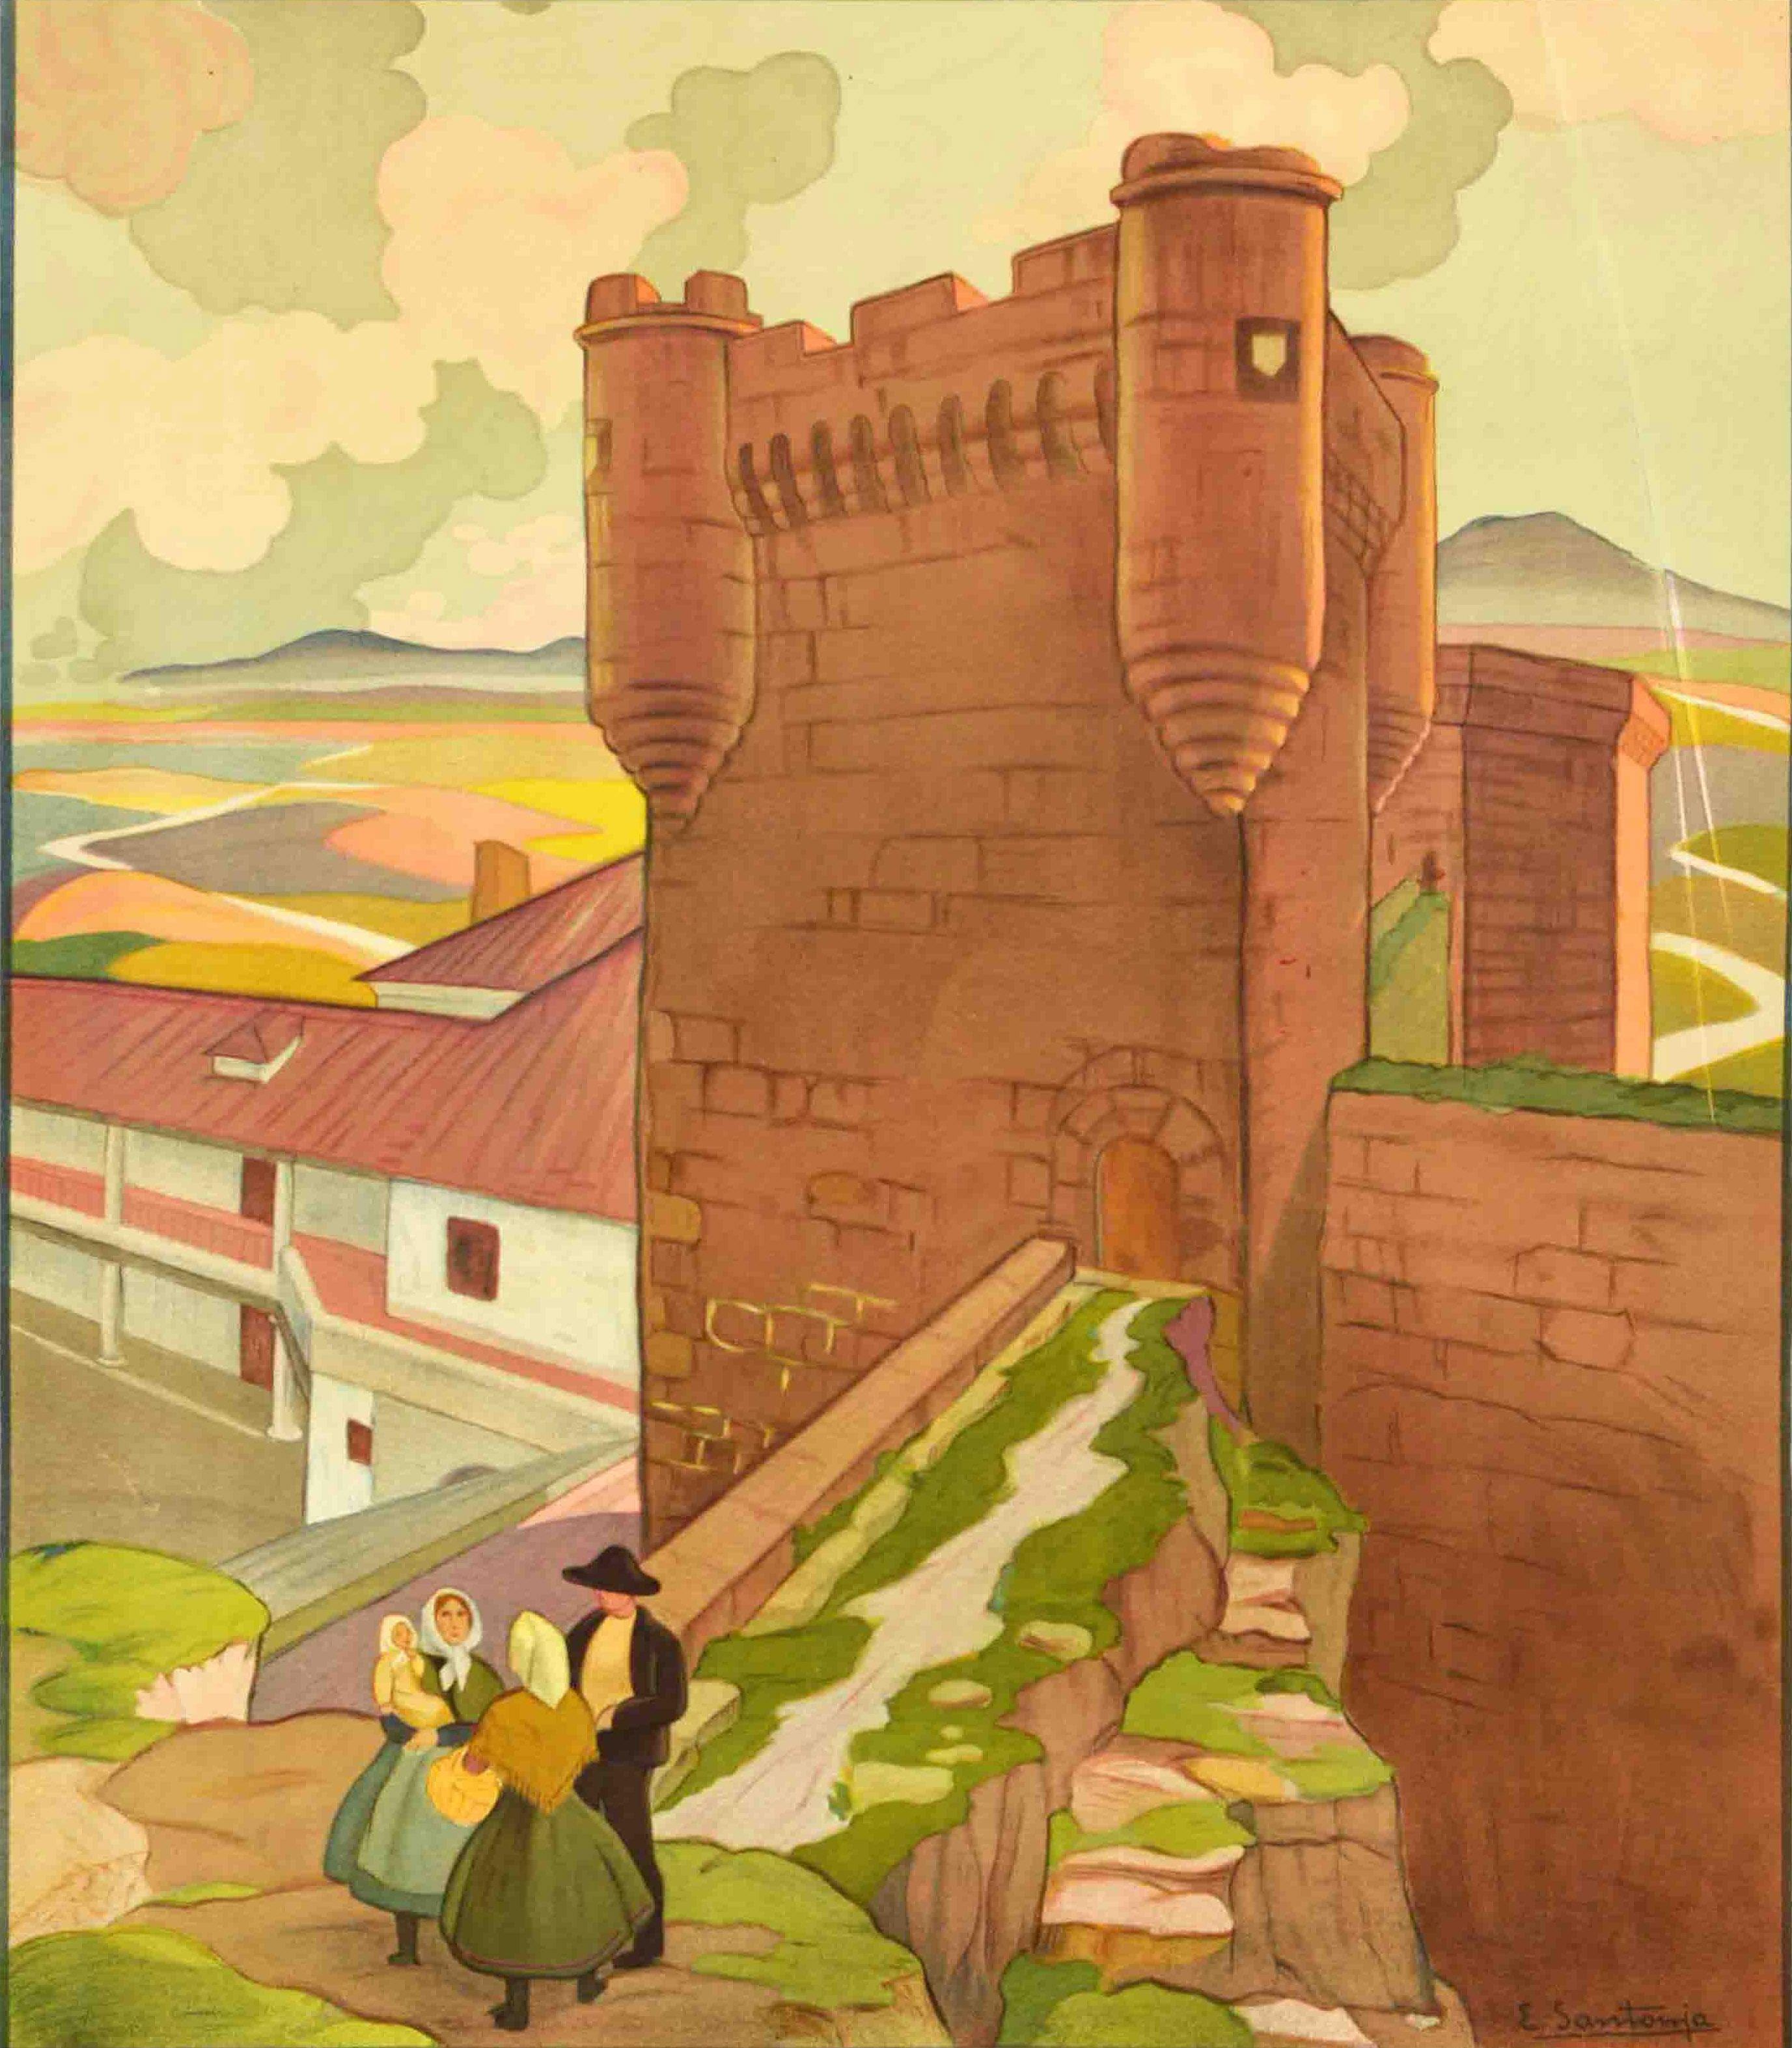 Original vintage travel poster issued by the Spanish national tourist board Patronato Nacional del Turismo PNT for the historic stone castle of Oropesa in Toledo Spain featuring scenic artwork depicting a group of people in traditional dress talking